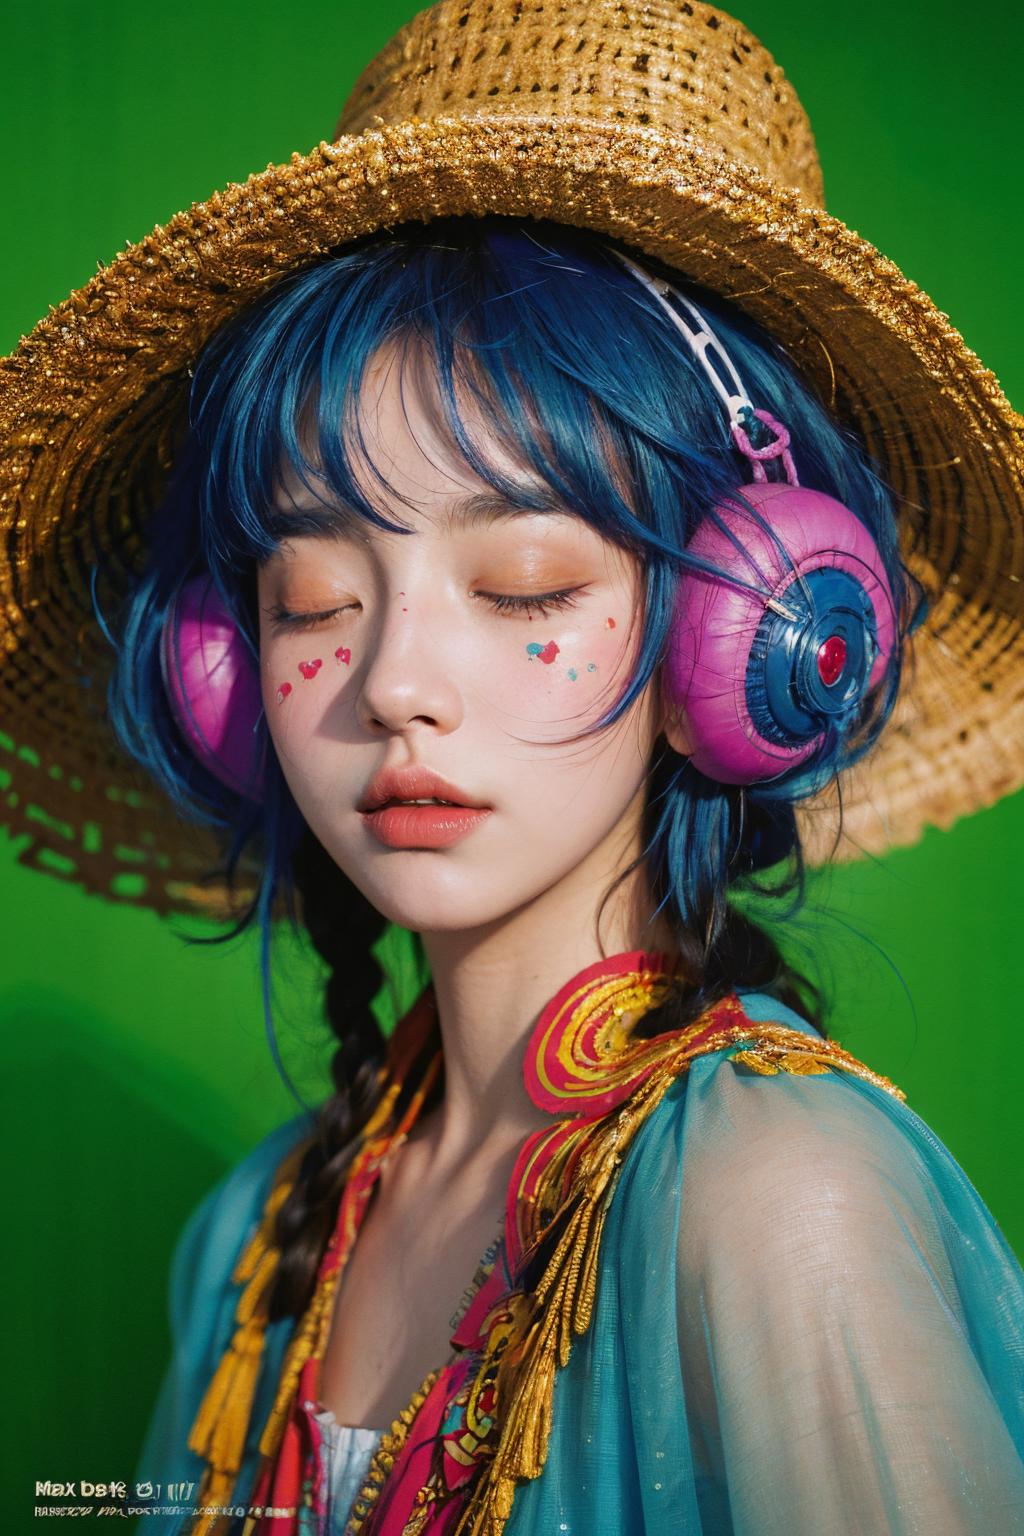 A girl with blue hair and pink hearts on her cheeks wearing headphones.